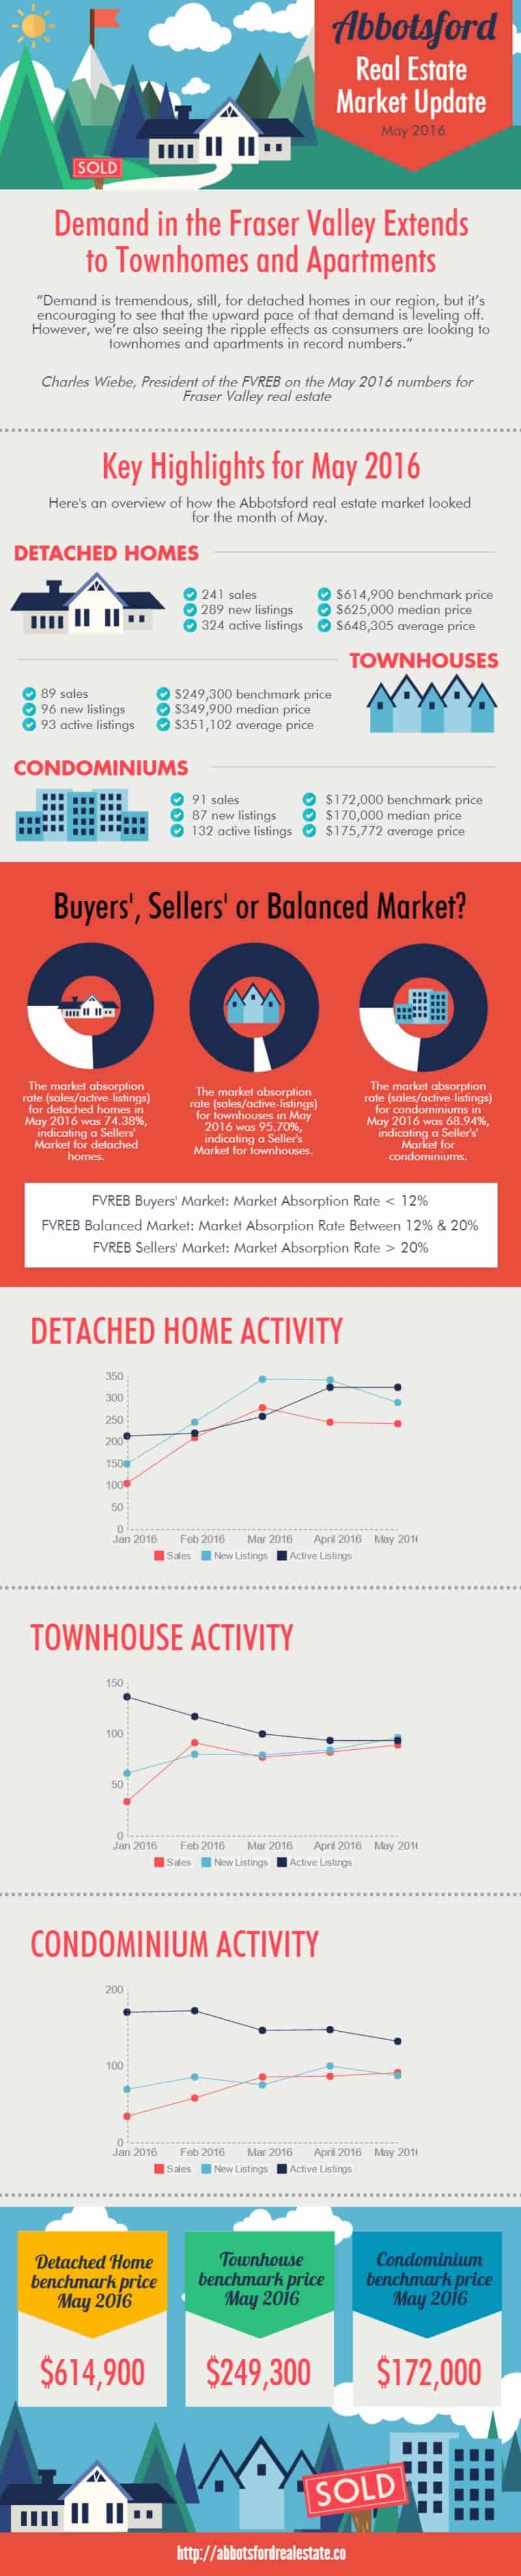 Abbotsford Detached Home Market Update May 2016 Infographic